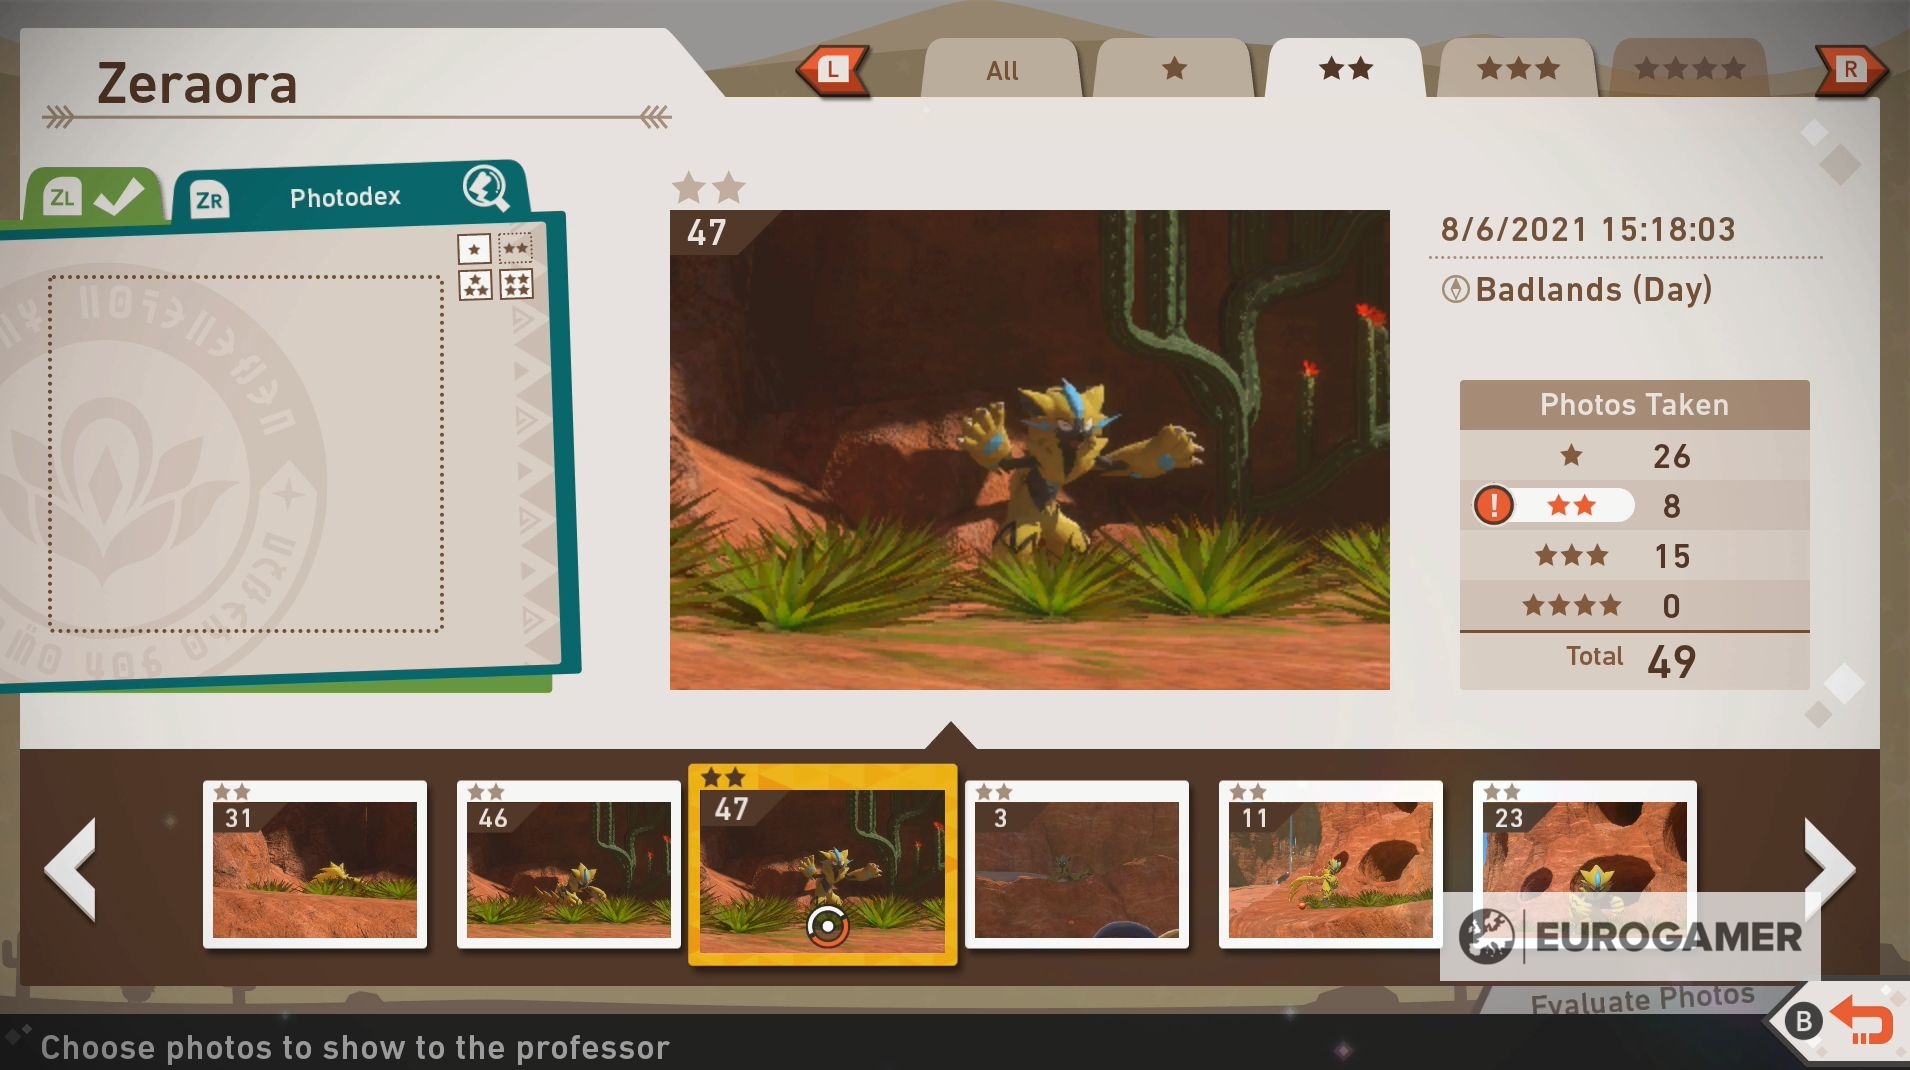 New Pokémon Snap  Zeraoras location How to take a four star Zeraora photo and complete the Illusion of the Badlands explained